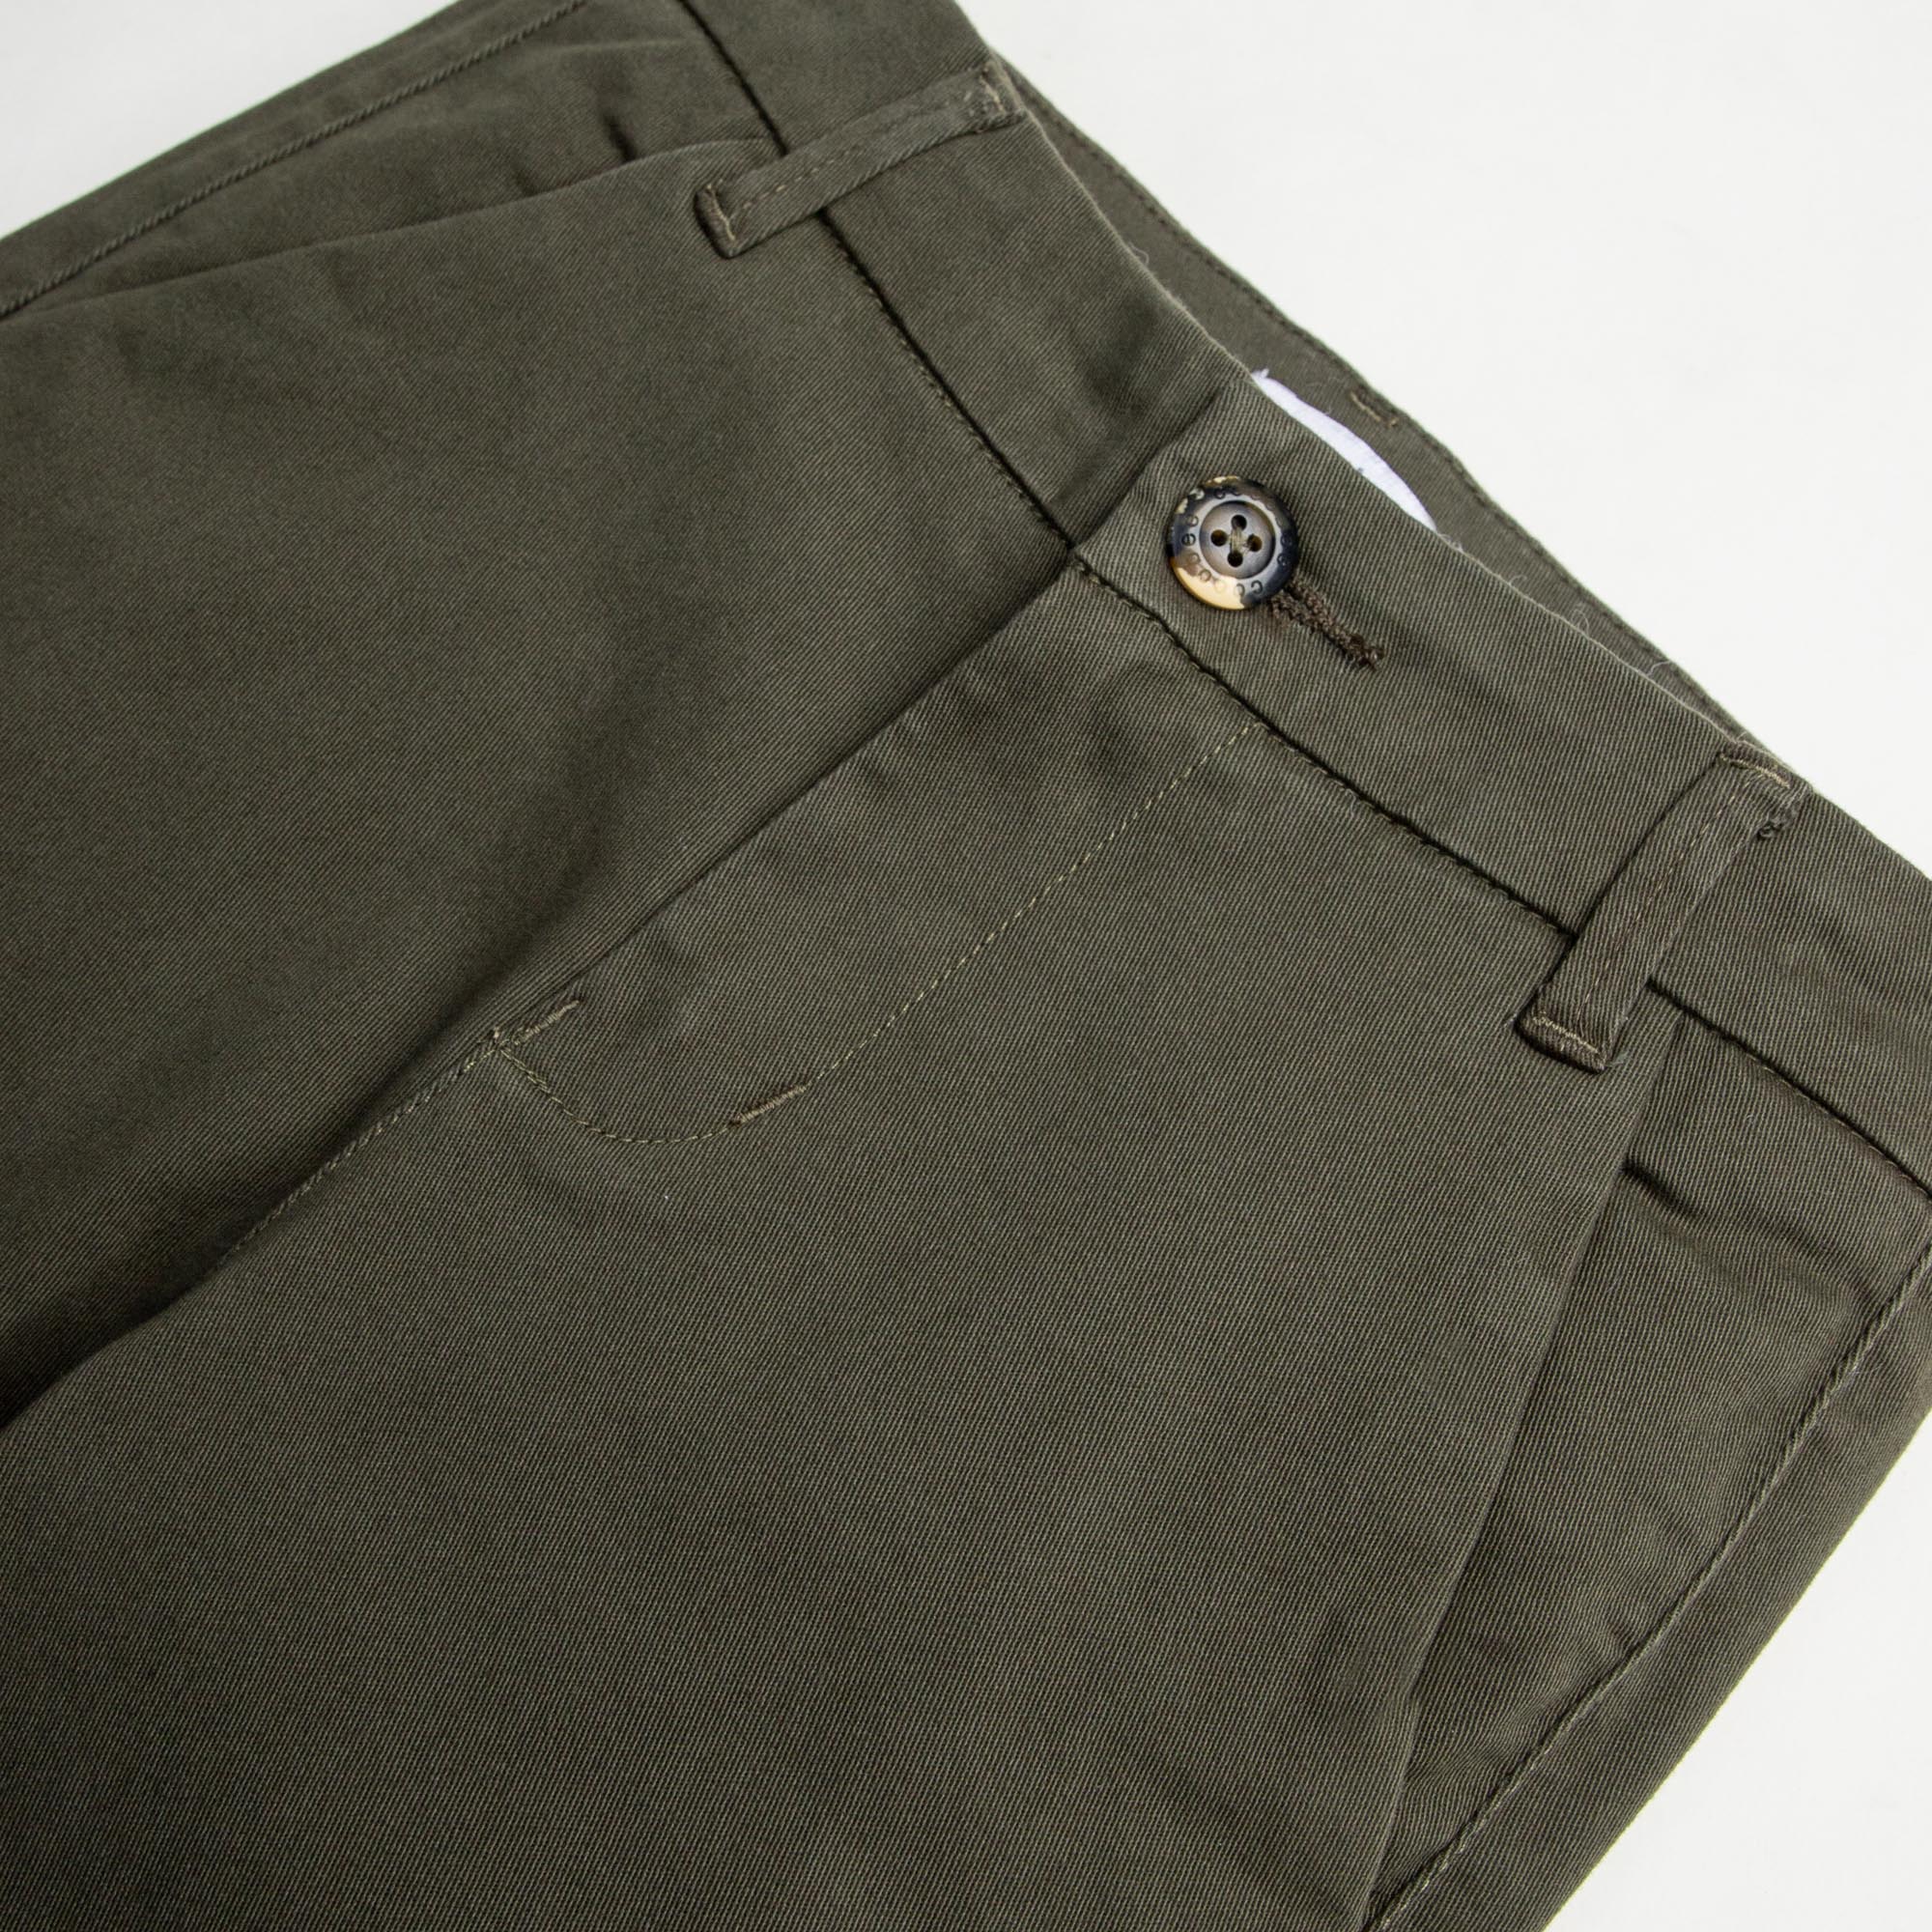 Olive Green Cotton Pant